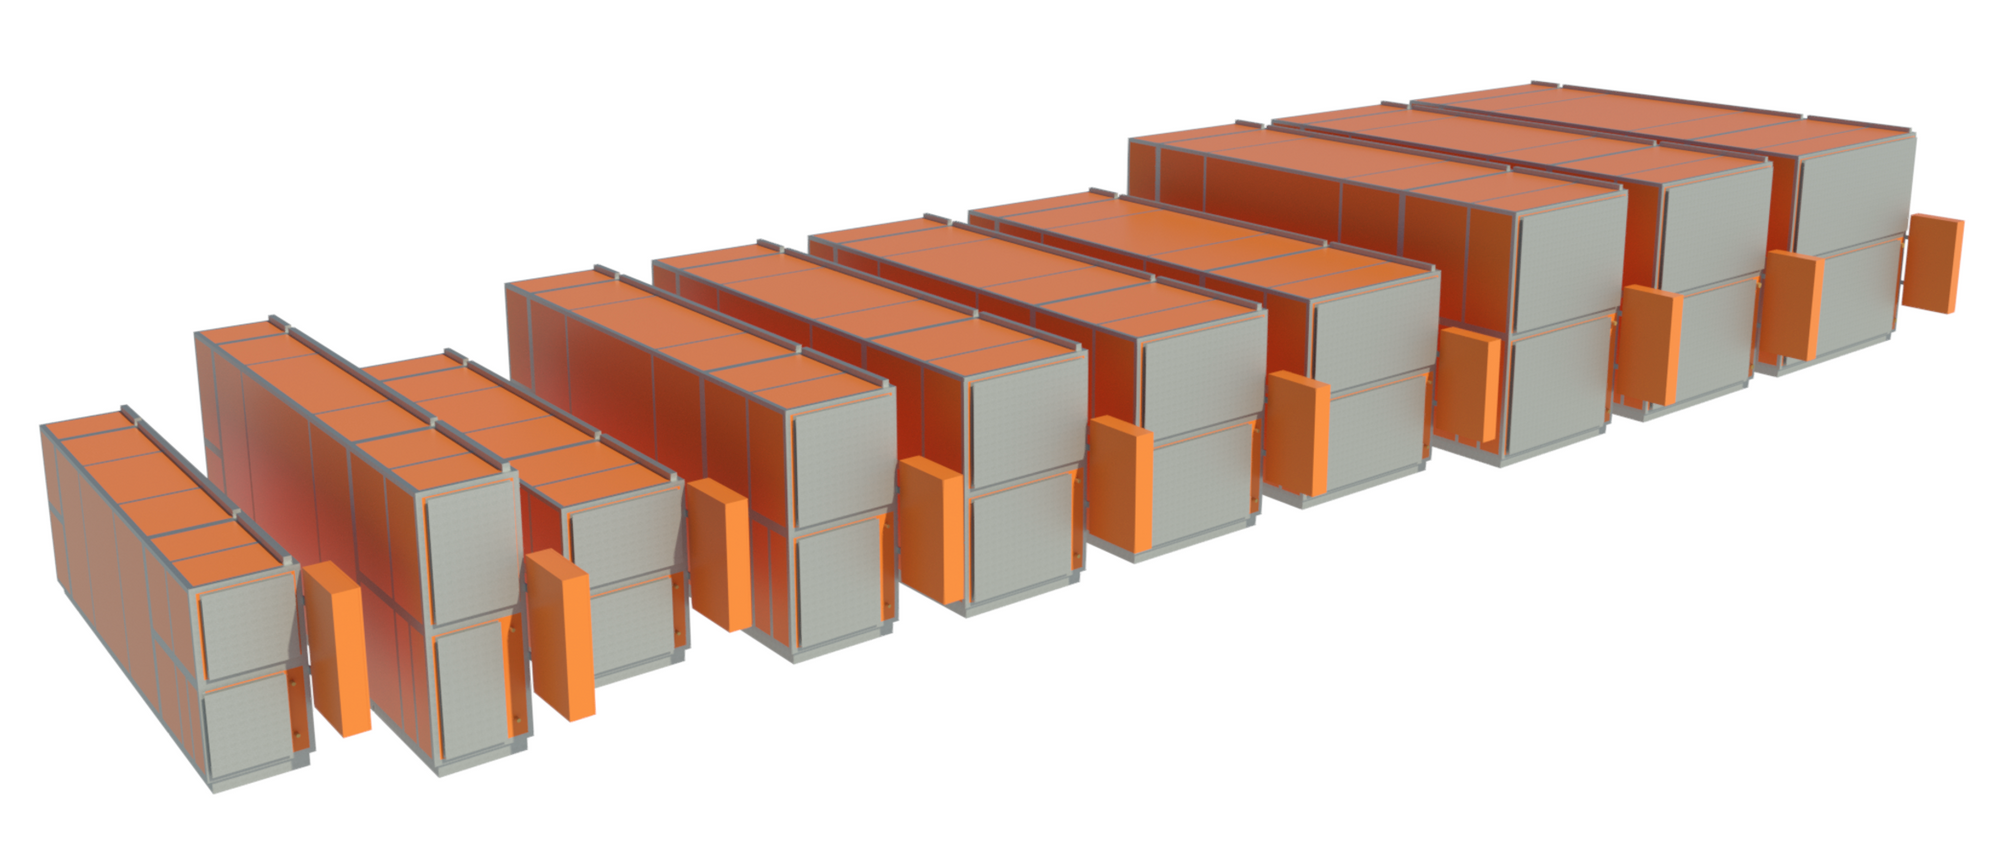 Revit 3D view of the Adconair 76 AHU with 10 types for various airflows.